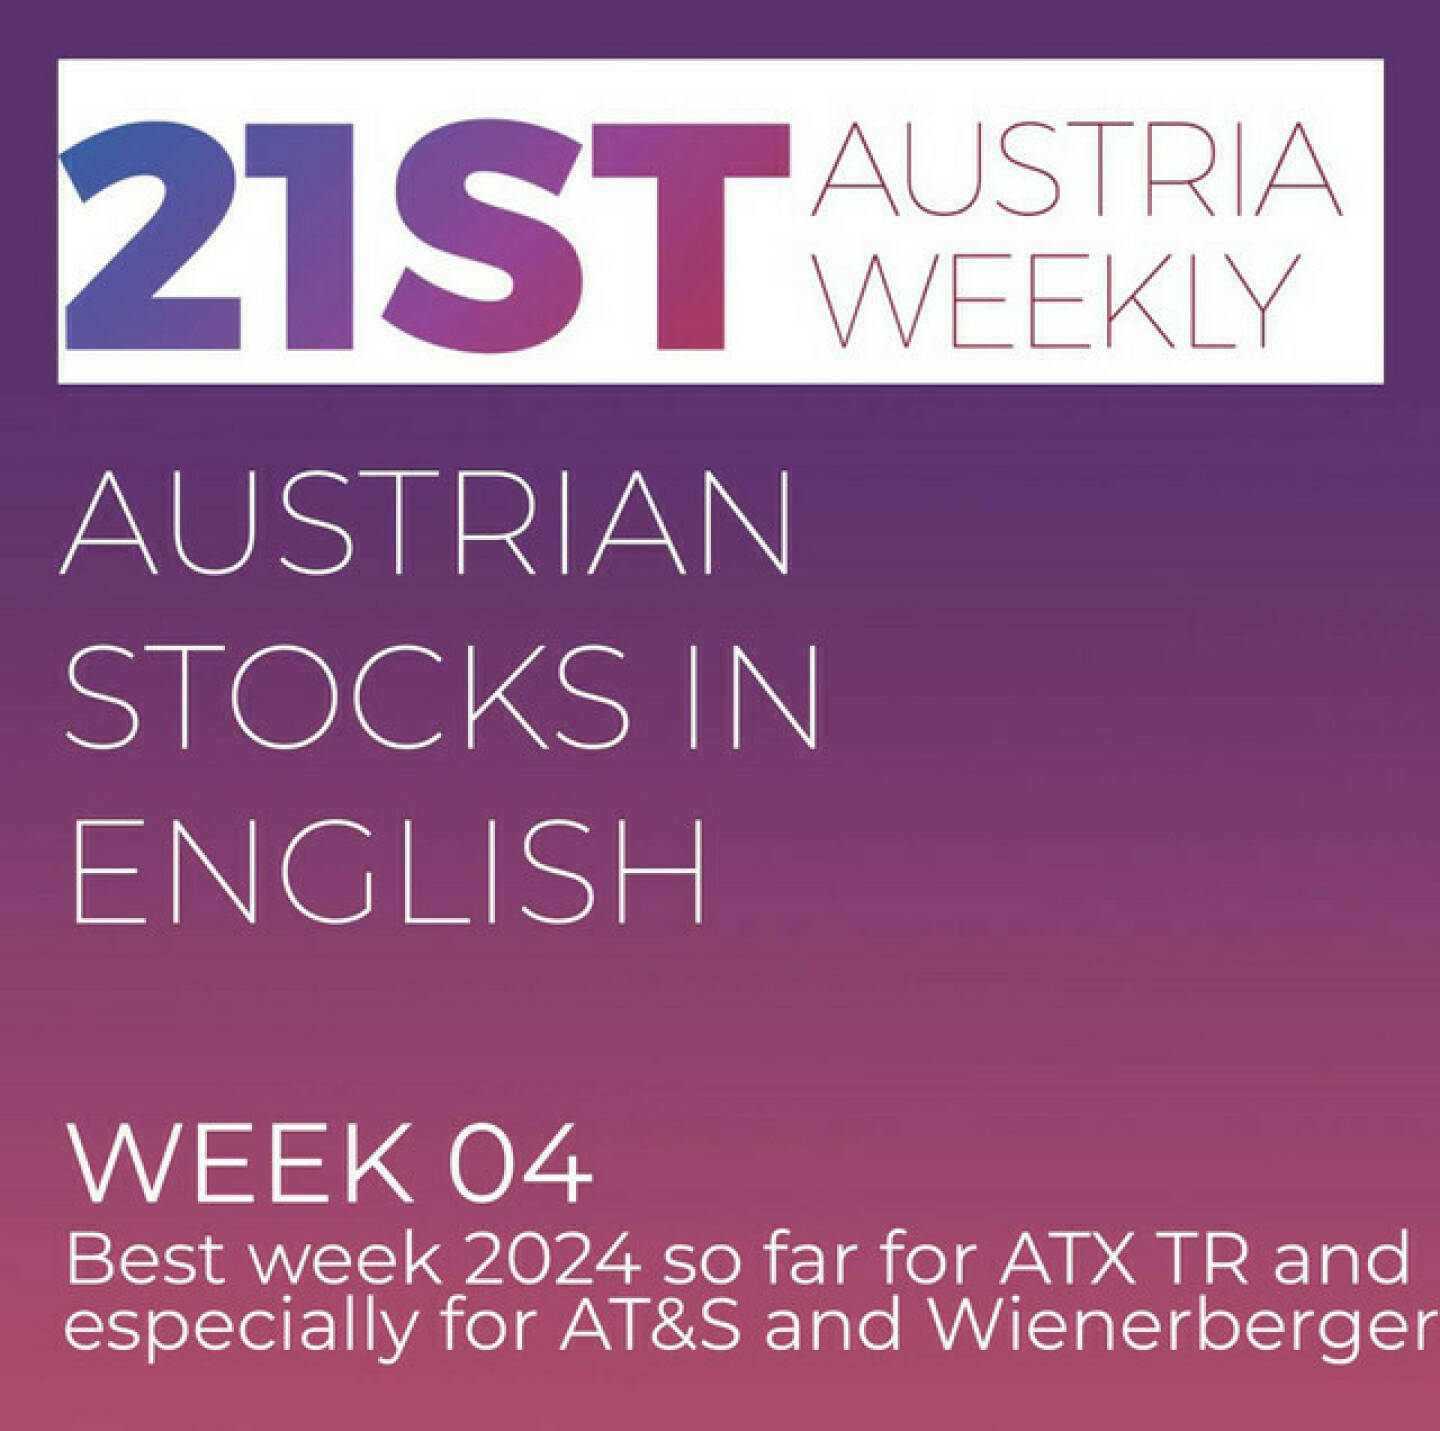 https://open.spotify.com/episode/6YlSSaep7rLU03ehFWpip5
Austrian Stocks in English: Week 4 as the best week 2024 so far for ATX TR and especially fine for AT&S and Wienerberger - <p>Welcome to &#34;Austrian Stocks in English - presented by Palfinger&#34;, the english spoken weekly Summary for the Austrian Stock Market,  positioned every Sunday in the mostly german languaged Podcast &#34;Audio-CD.at Indie Podcasts&#34;- Wiener Börse, Sport Musik und Mehr“ . <br/><br/>The following script is based on our 21st Austria weekly. Week 4 was a very good week for ATX TR, which gained 3,32 percent to 7.661,61 points and this means also that we are now in the profit zone 2024. Wienerberger is now 7 days in a row up and AT&amp;S was last week the best stock from our Private Investor Relations Universe. News came from AT&amp;S, Andritz, Vienna Airport, Frequentis, Immofinanz, Semperit, UBM, Kapsch TrafficCom, spoken by Alison.<br/><br/><a href=https://boerse-social.com/21staustria target=_blank>https://boerse-social.com/21staustria</a><br/><br/><a href=https://www.audio-cd.at/search/austrian%20stocks%20in%20english target=_blank>https://www.audio-cd.at/search/austrian%20stocks%20in%20english</a><br/><br/>30x30 Finanzwissen pur für Österreich auf Spotify spoken by Alison:: <a href=https://open.spotify.com/playlist/3MfSMoCXAJMdQGwjpjgmLm target=_blank>https://open.spotify.com/playlist/3MfSMoCXAJMdQGwjpjgmLm</a><br/><br/>Please rate my Podcast on Apple Podcasts (or Spotify): <a href=https://podcasts.apple.com/at/podcast/audio-cd-at-indie-podcasts-wiener-boerse-sport-musik-und-mehr/id1484919130 target=_blank>https://podcasts.apple.com/at/podcast/audio-cd-at-indie-podcasts-wiener-boerse-sport-musik-und-mehr/id1484919130</a> .And please spread the word : <a href=https://www.boerse-social.com/21staustria target=_blank>https://www.boerse-social.com/21staustria</a> - the address to subscribe to the weekly summary as a PDF.</p>